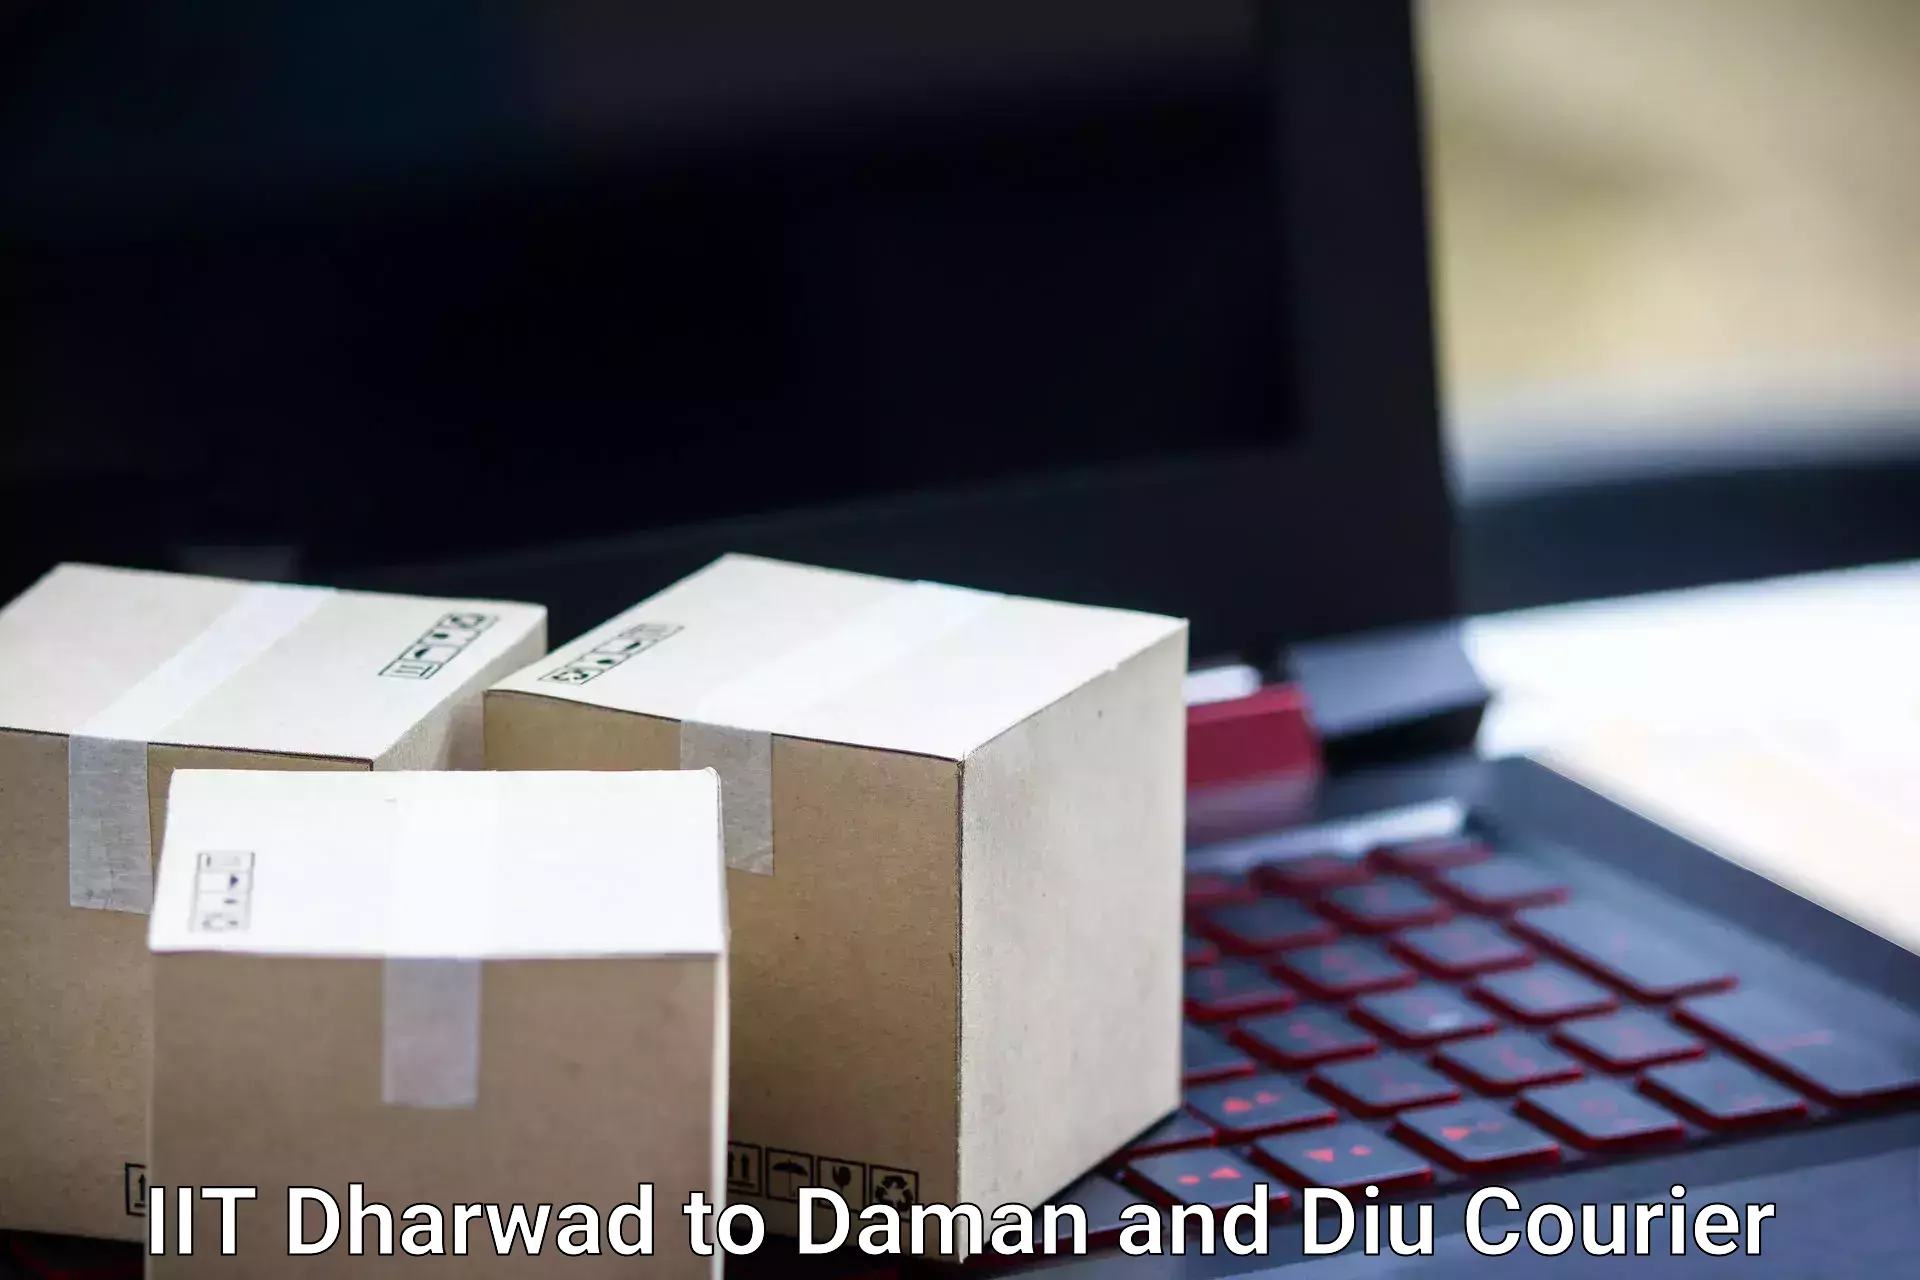 Luggage transport consulting in IIT Dharwad to Daman